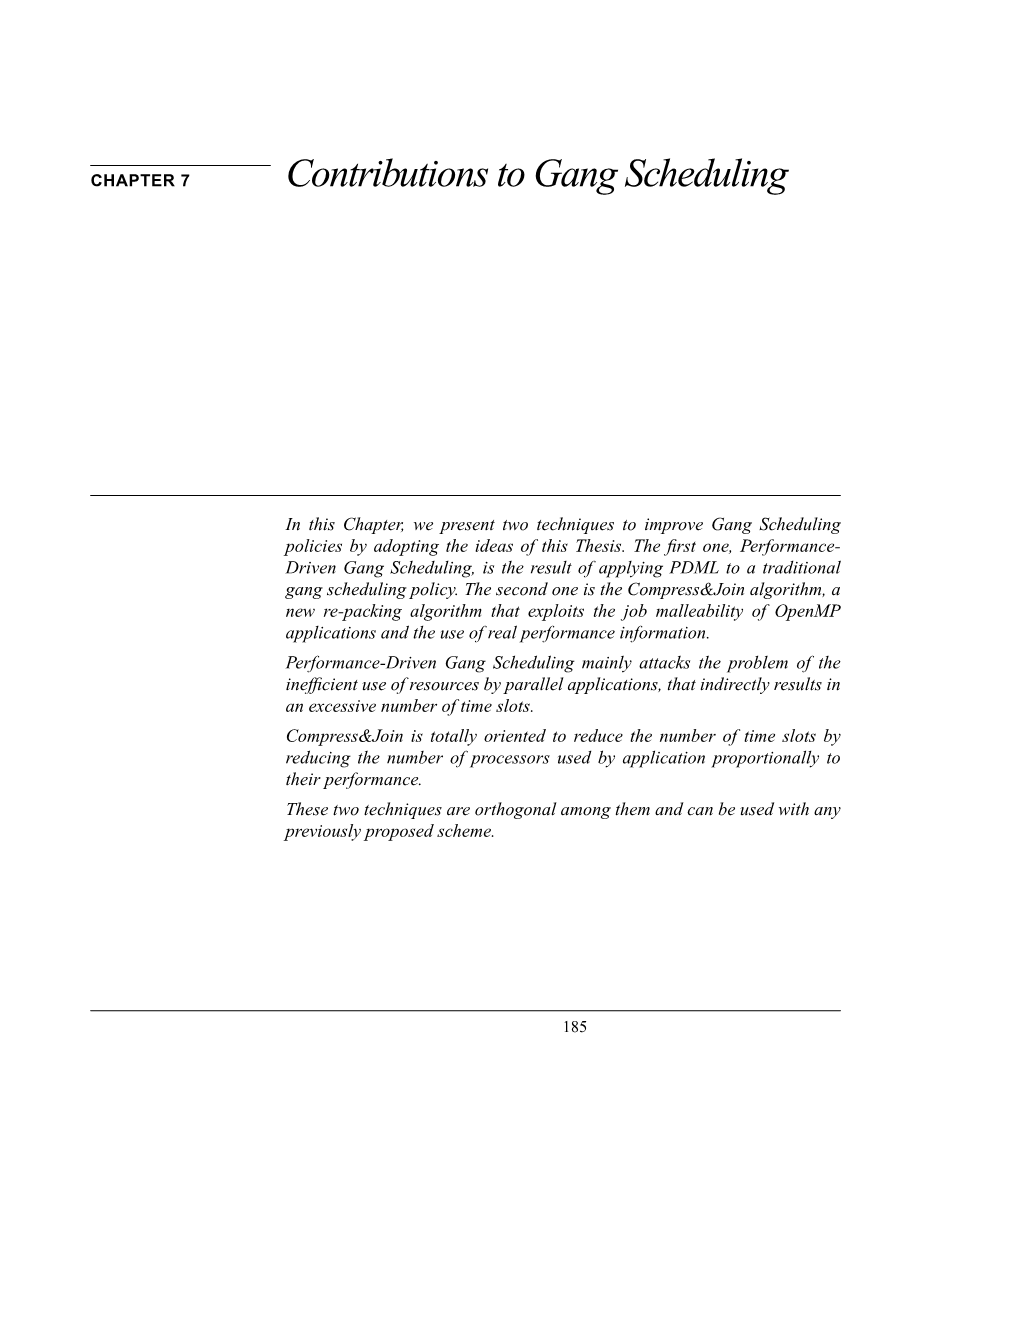 Contributions to Gang Scheduling